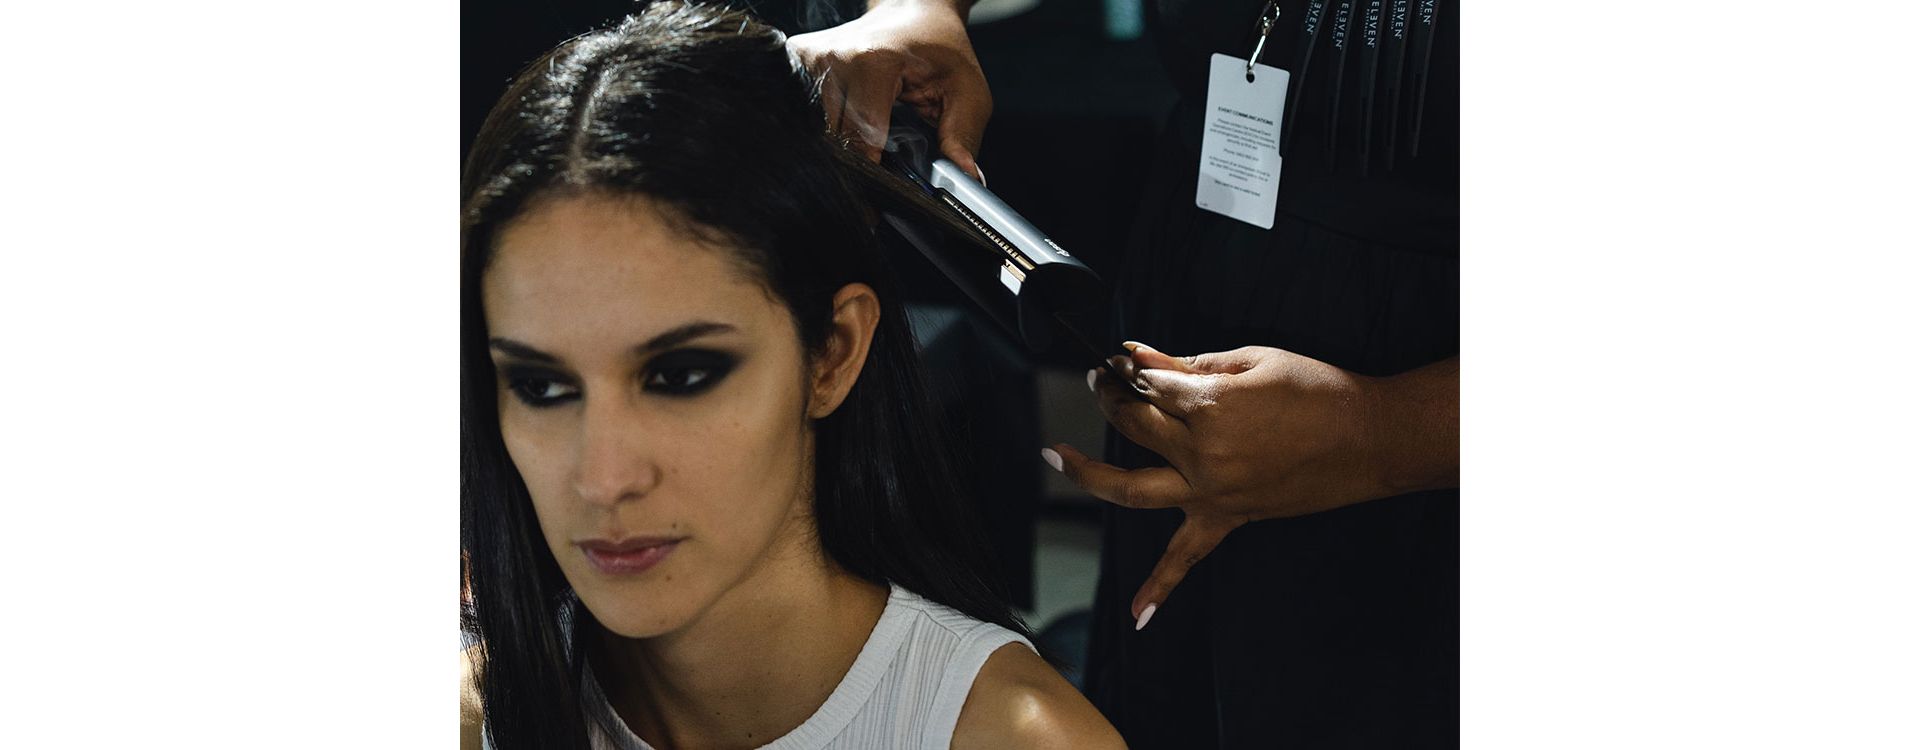 Dyson Corrale being used on models hair